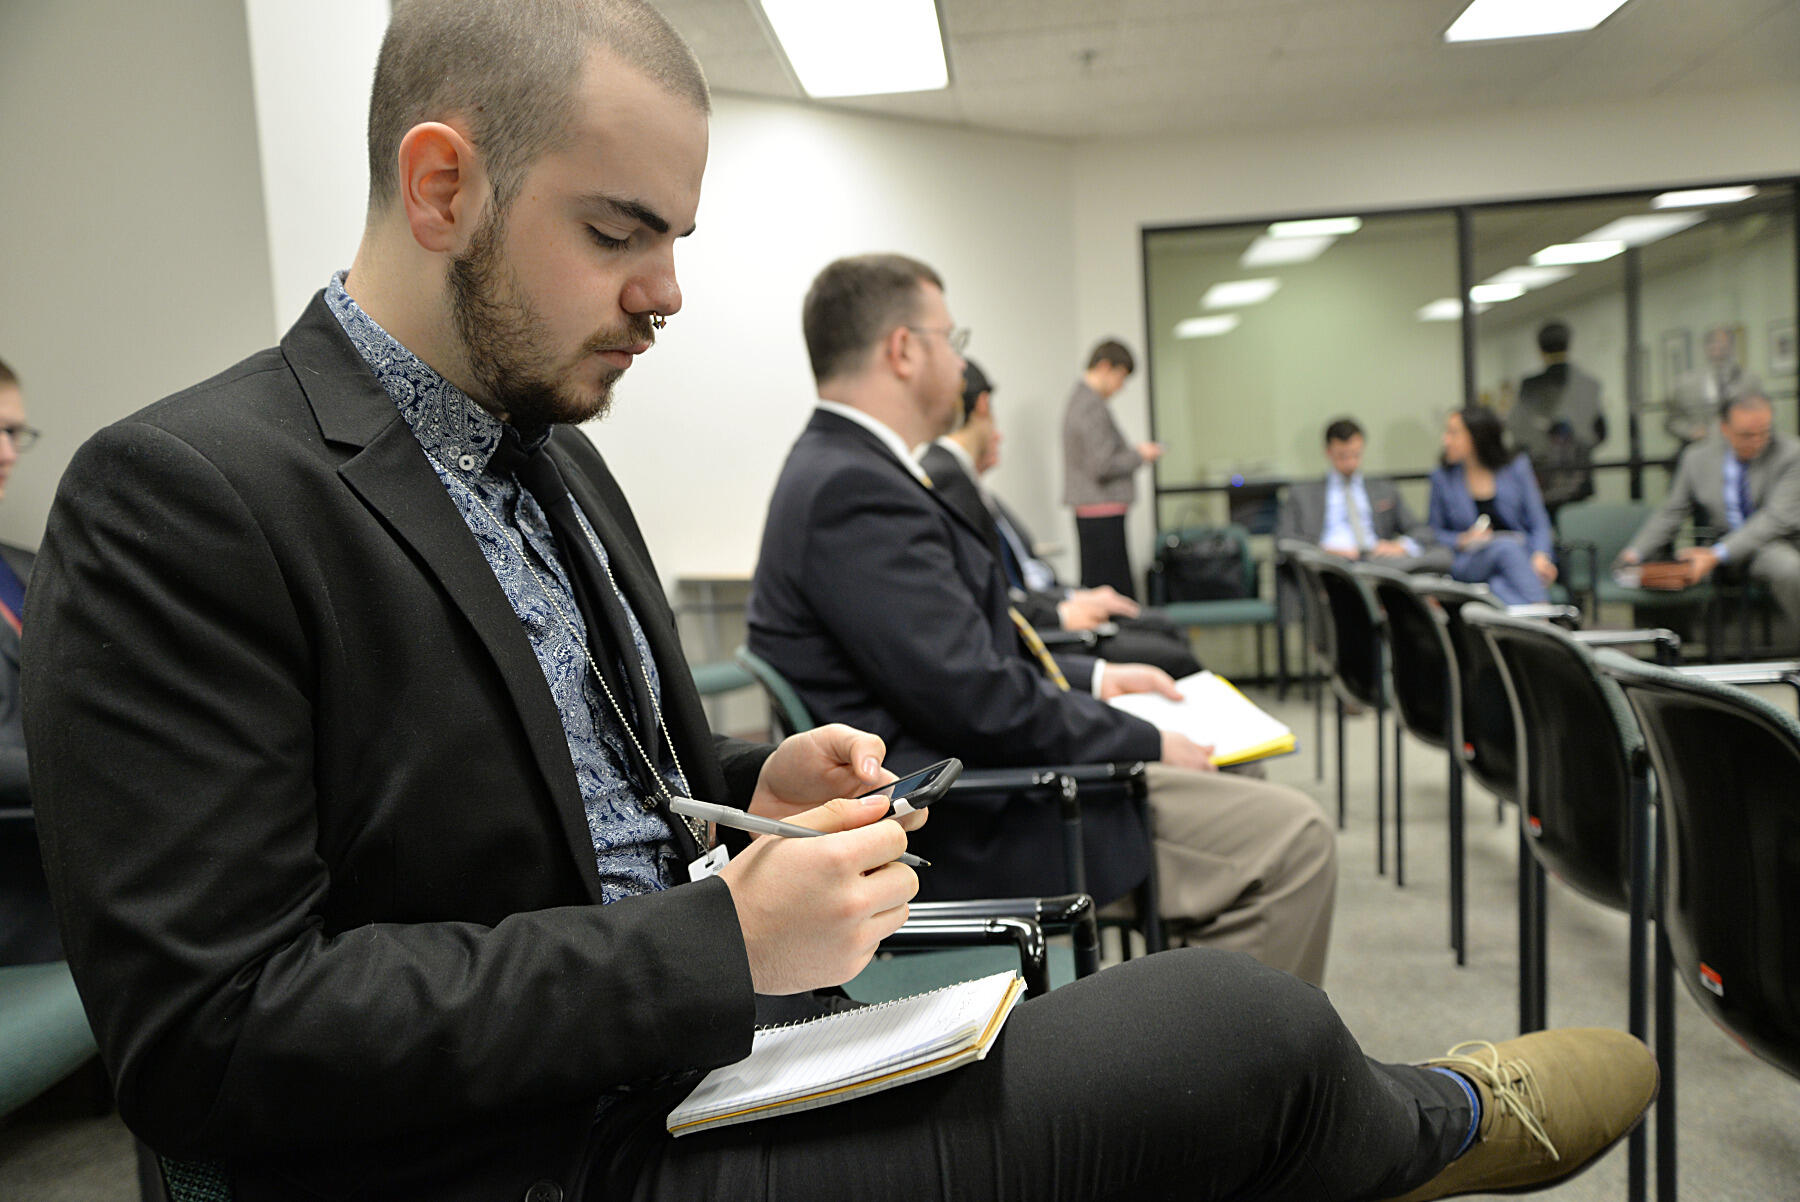 Senior journalism major Tyler Hammel covers a Virginia Senate subcommittee as it debates legislation that would keep chemical recipes used in fracking confidential as trade secrets.
<br>Photo by Brian McNeill, University Public Affairs